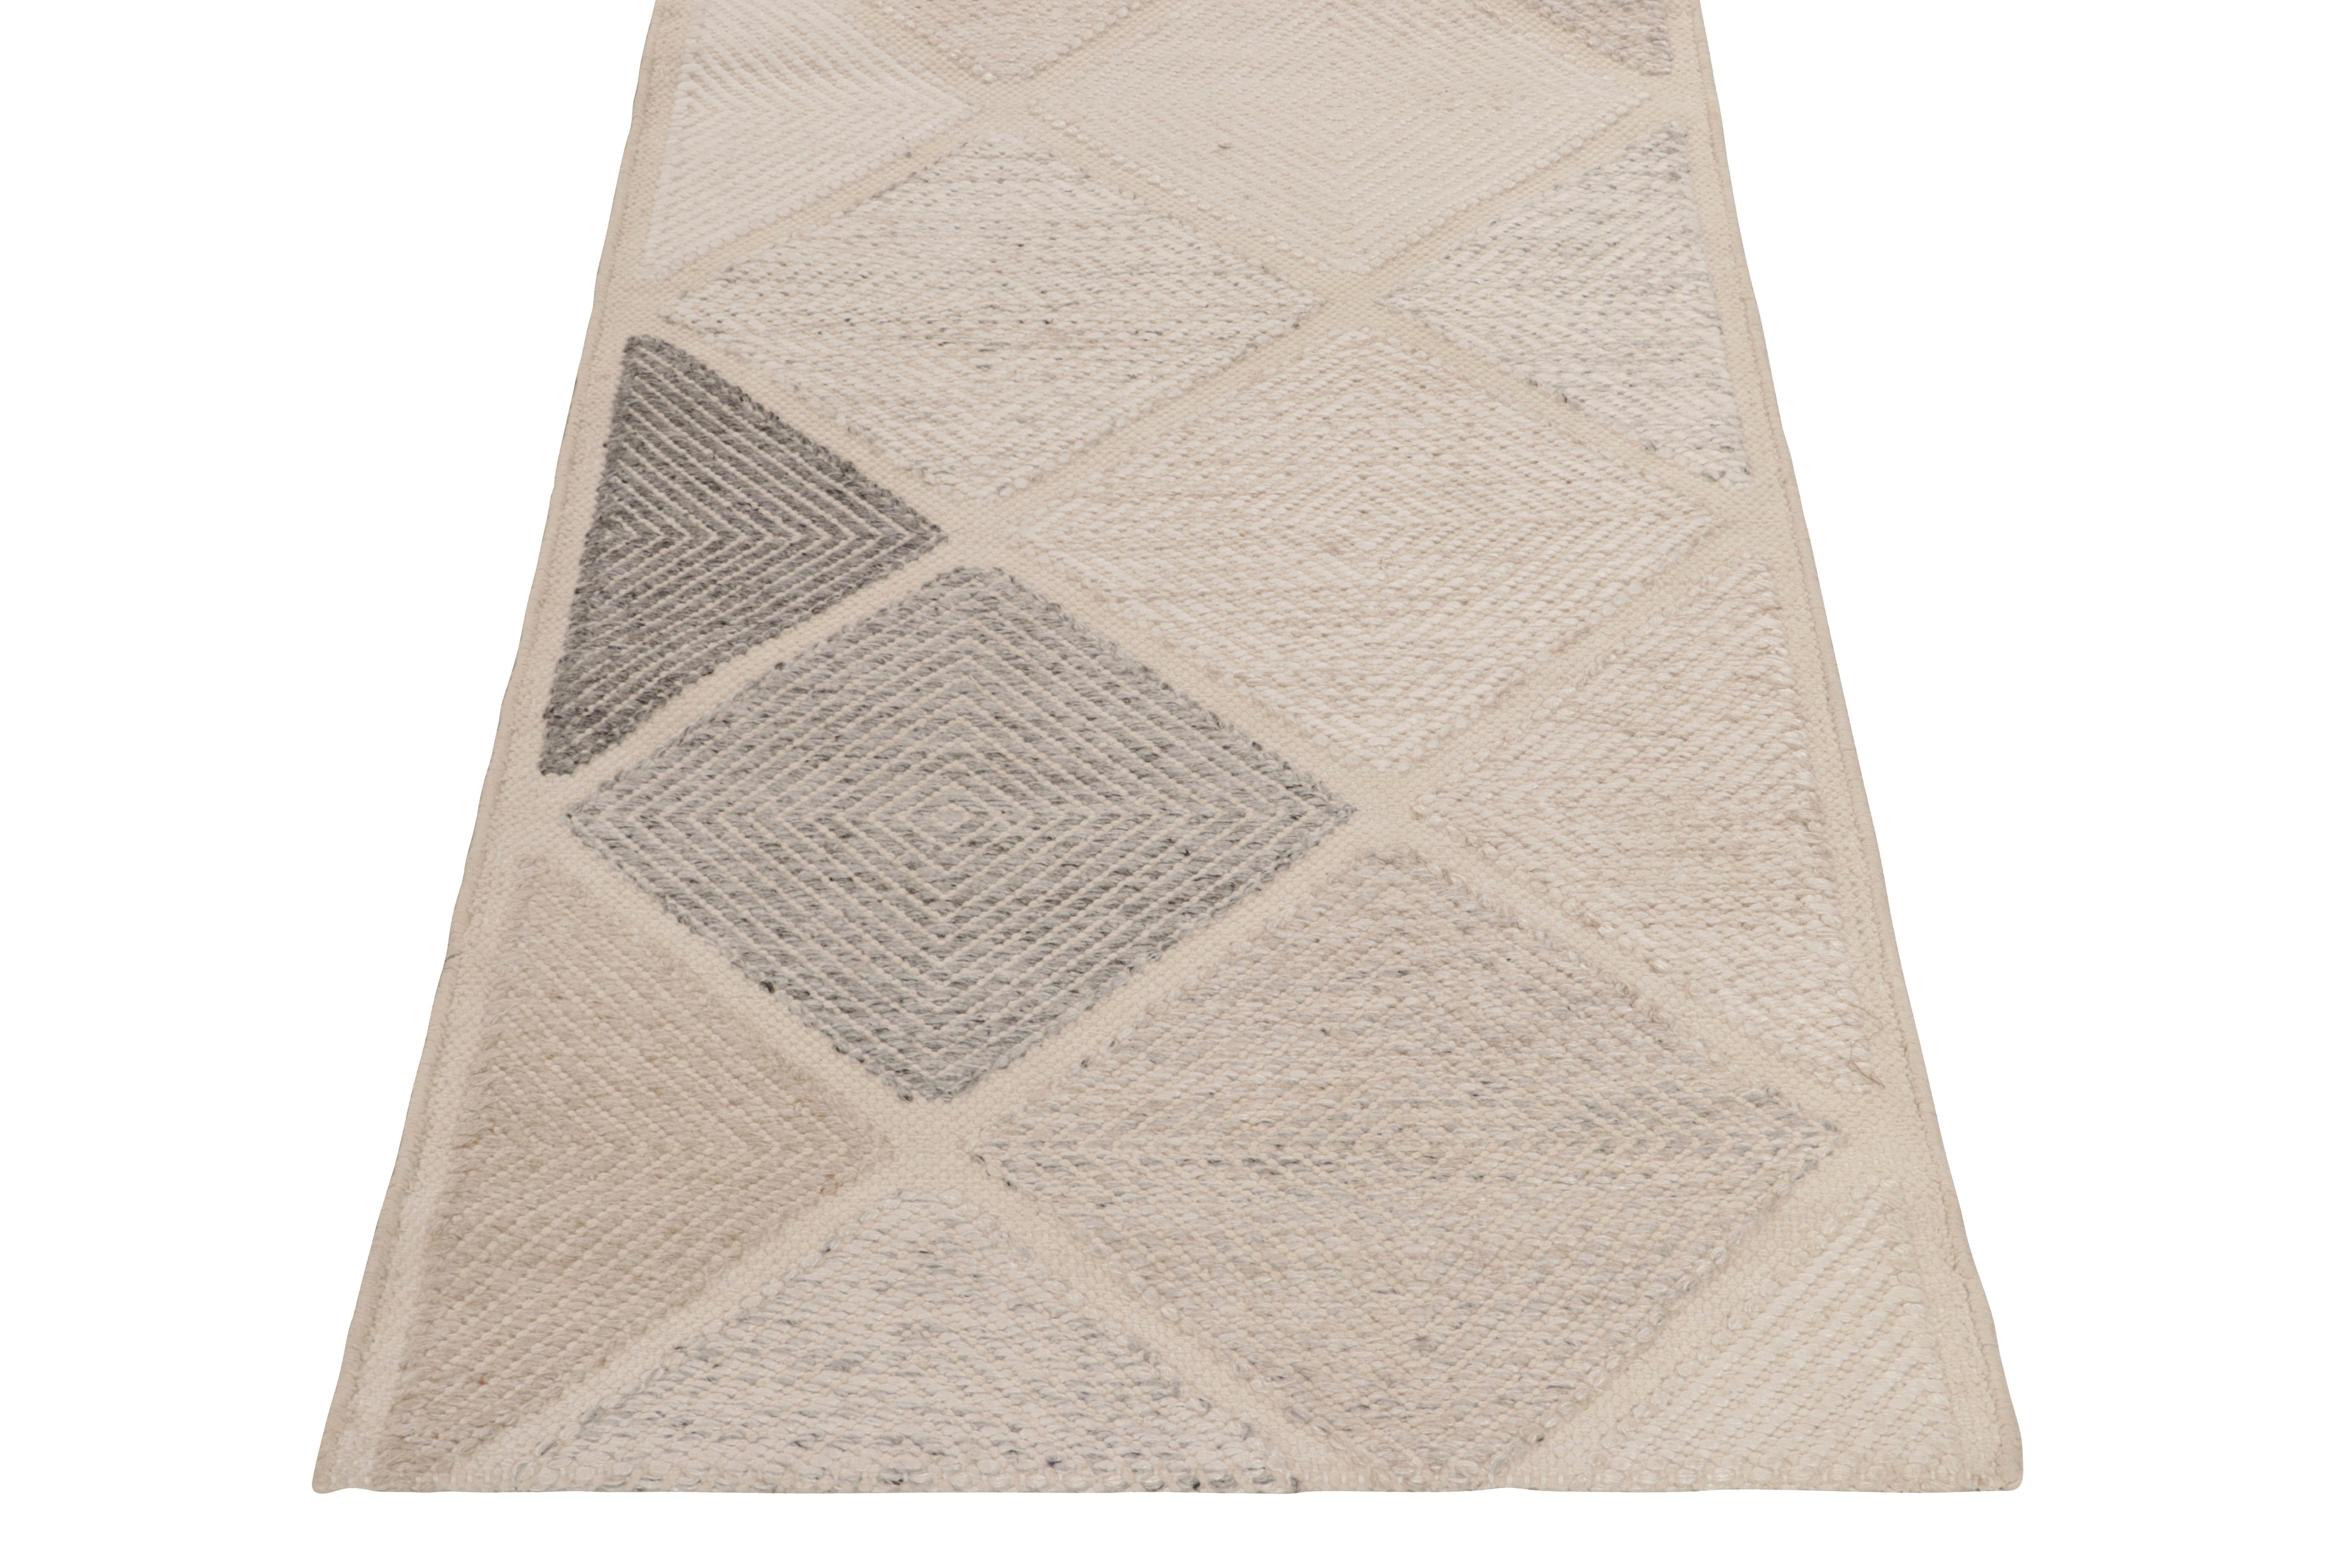 Drawing inspiration from a Swedish take on Moroccan diamond patterns, this 3x5 Kilim design comes from Rug & Kilim’s Scandinavian flatweave collection. The pattern prevails in a subtle high-low texture that draws the eye to each color for an exalted